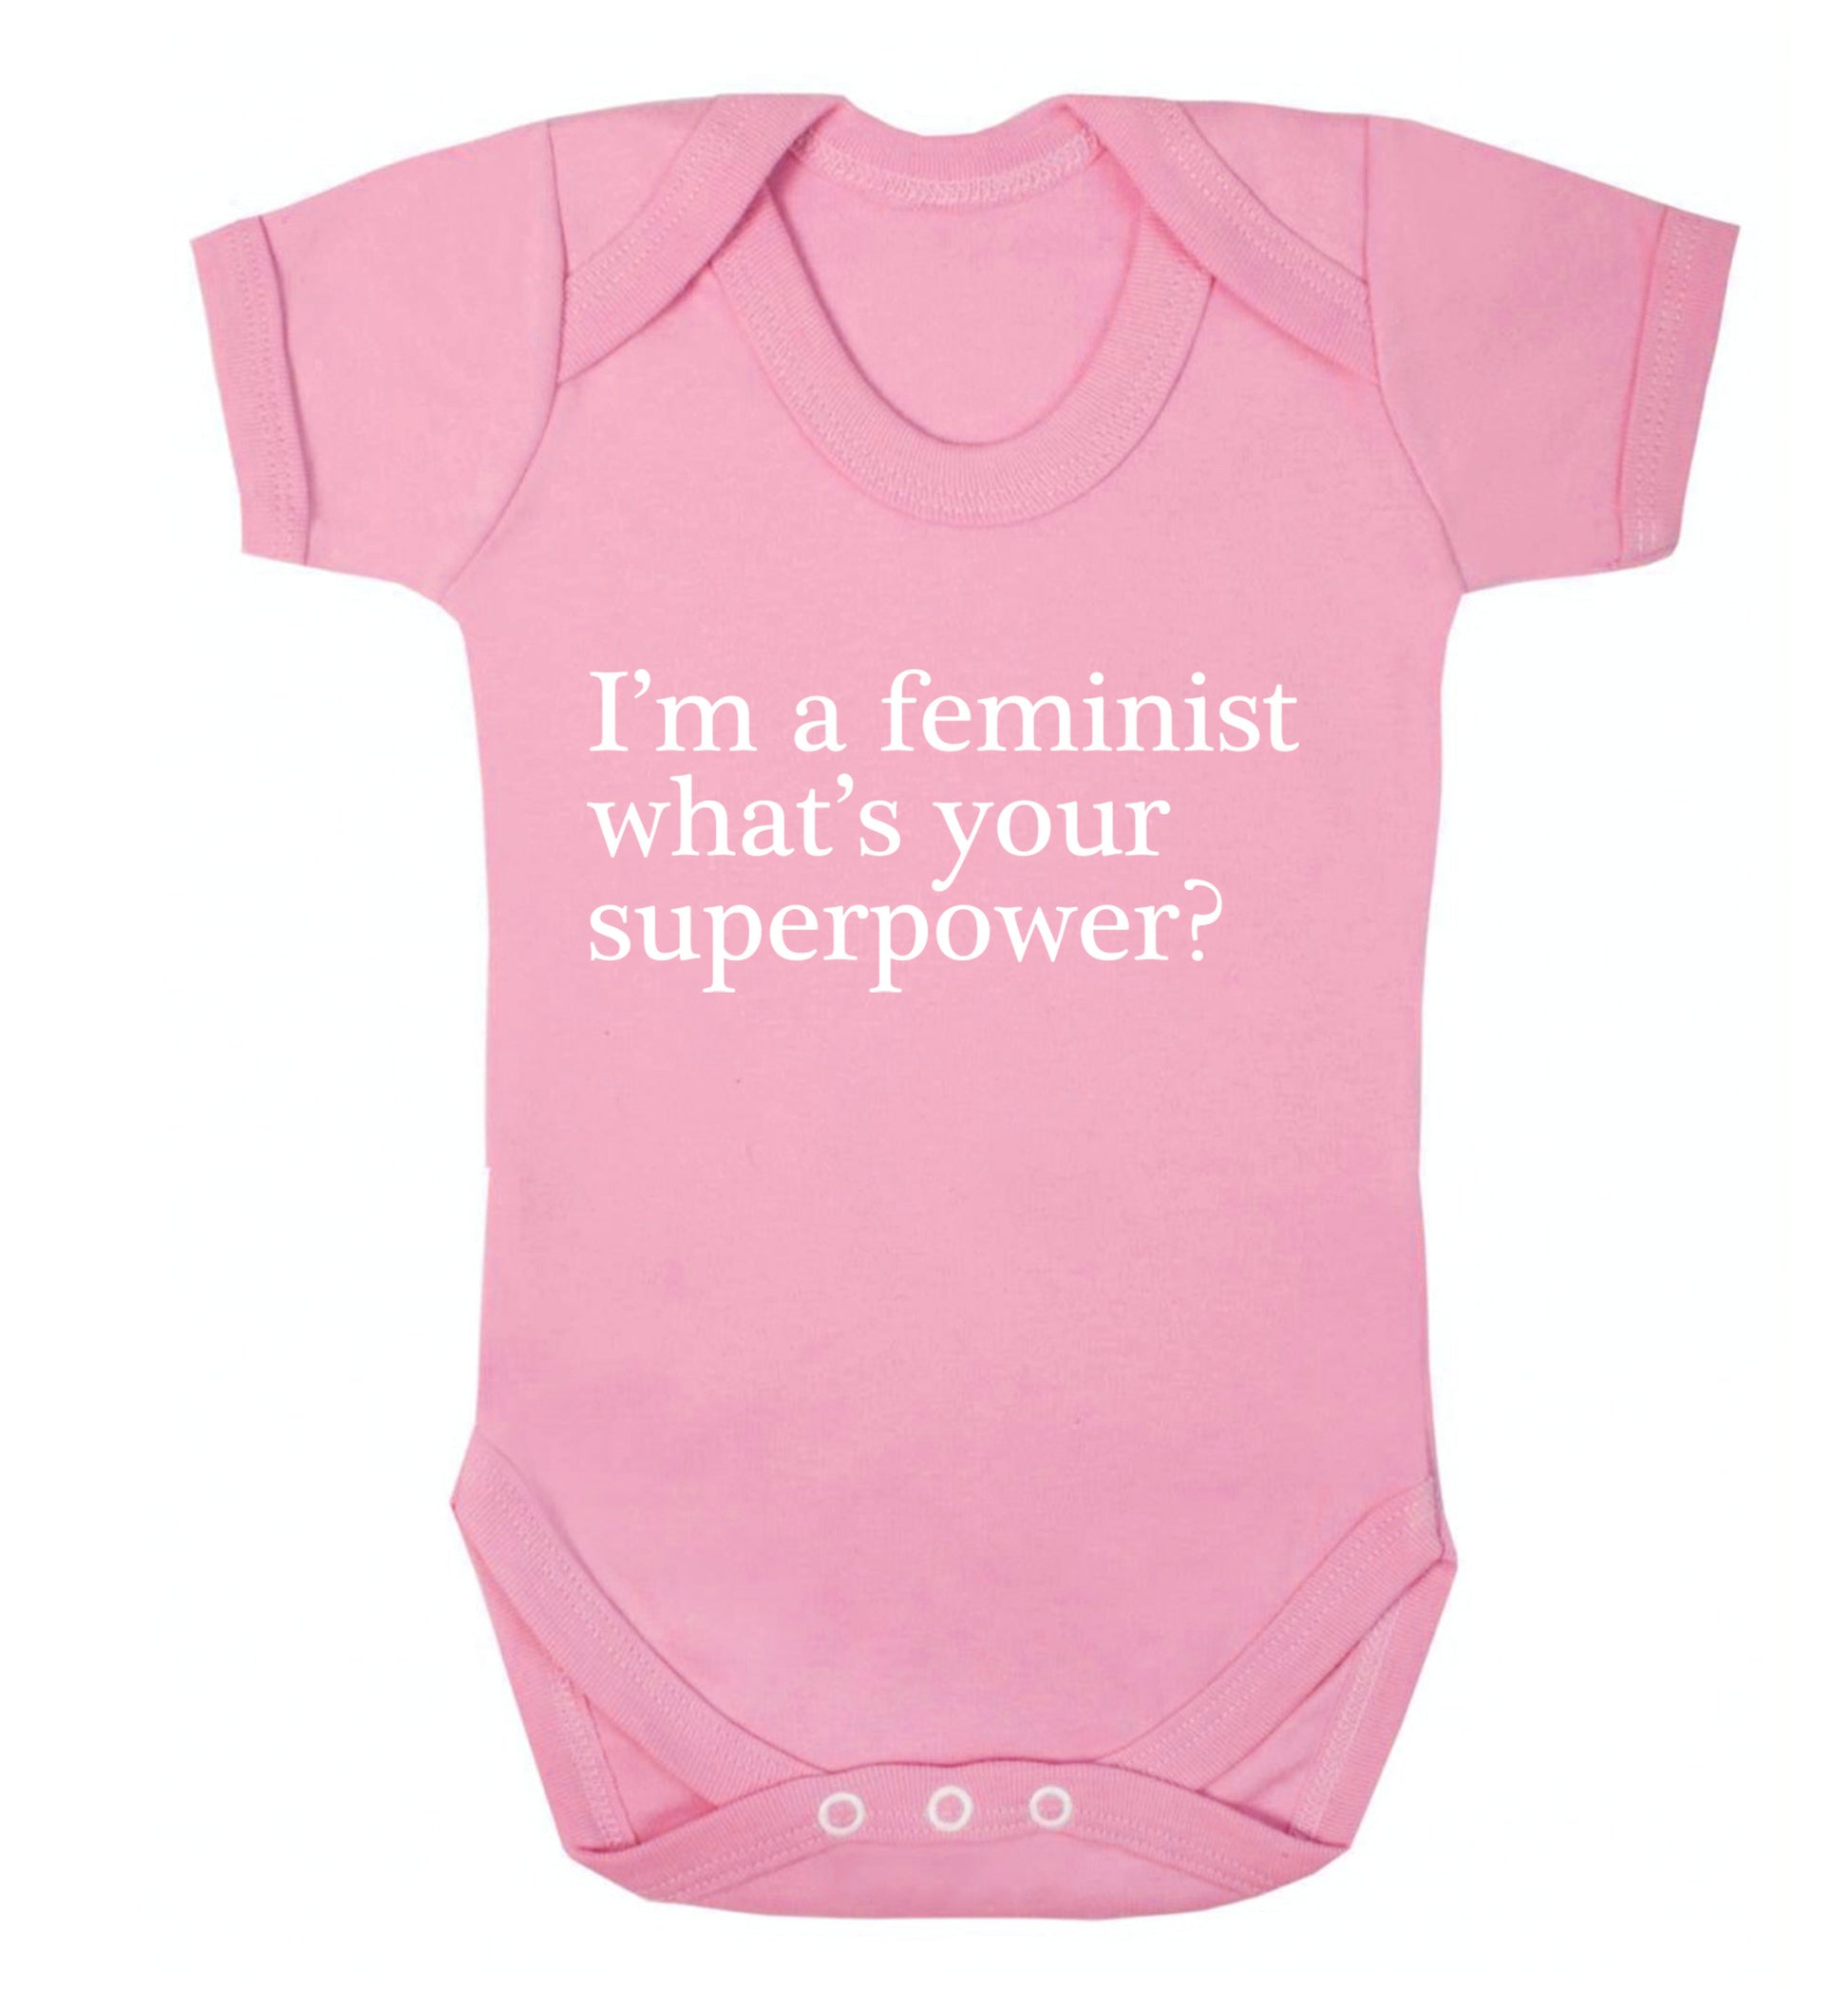 I'm a feminist what's your superpower? Baby Vest pale pink 18-24 months